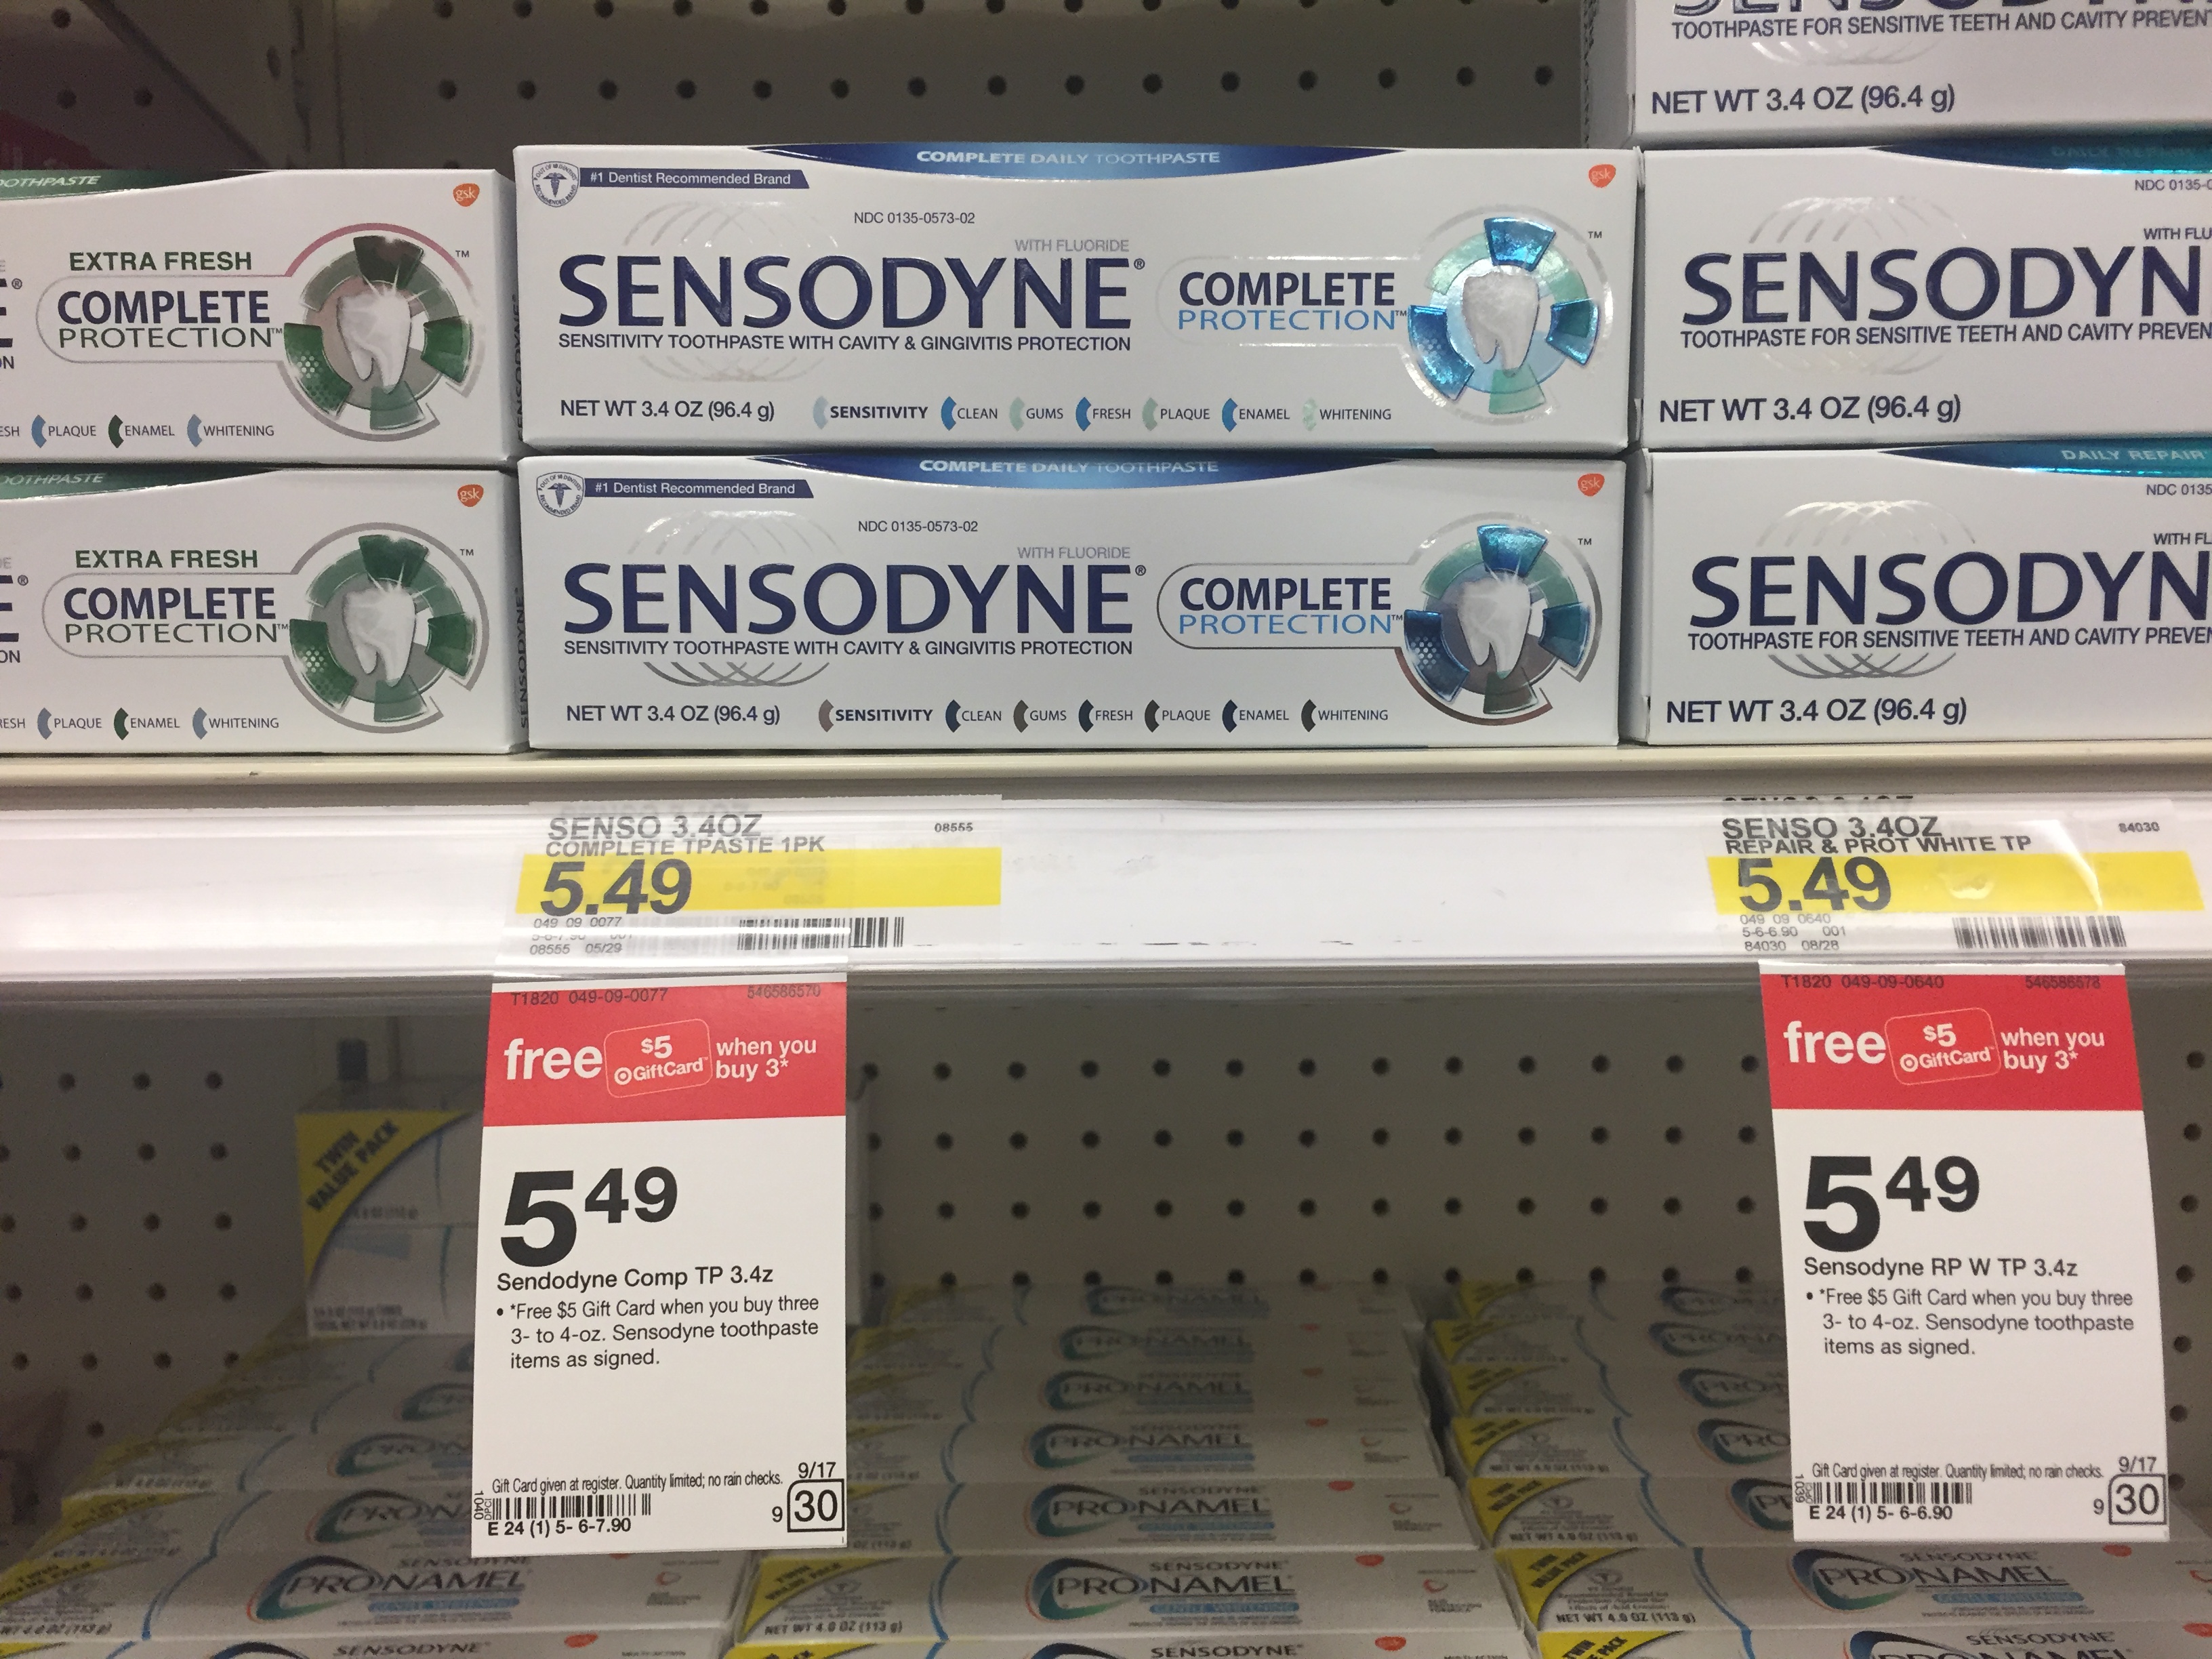 SIX New Oral Care Coupons = 50 Off Sensodyne Toothpaste at Target